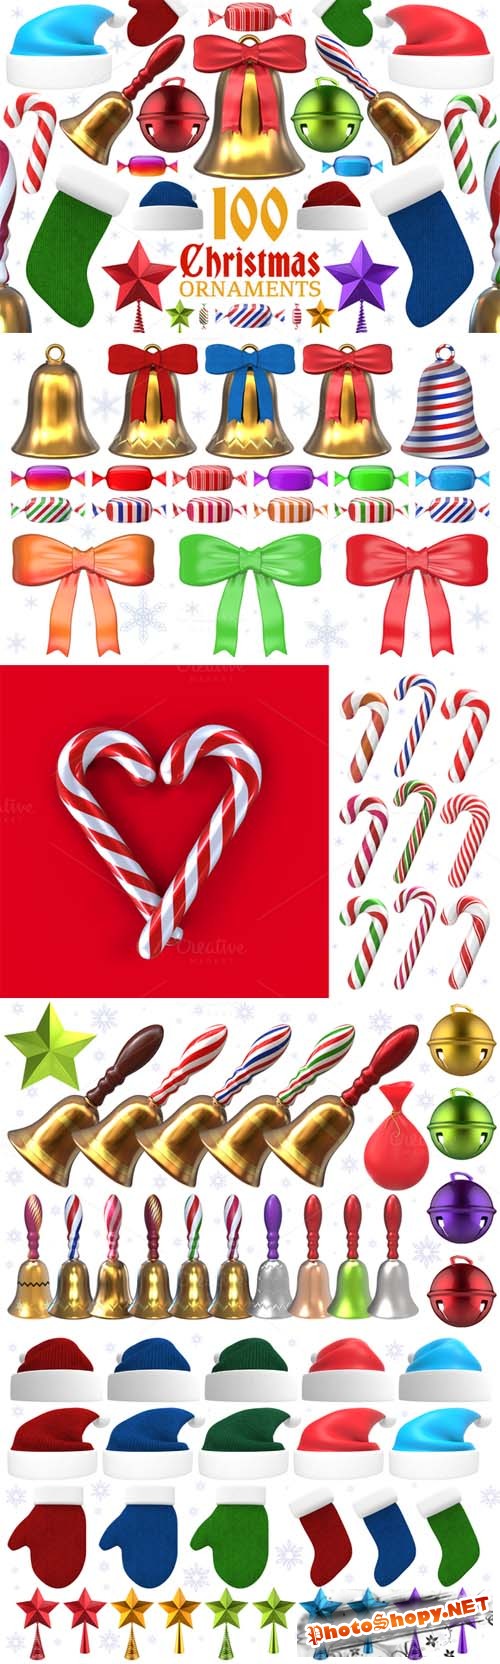 PNG Set - Christmas Ornaments and Items - 3D